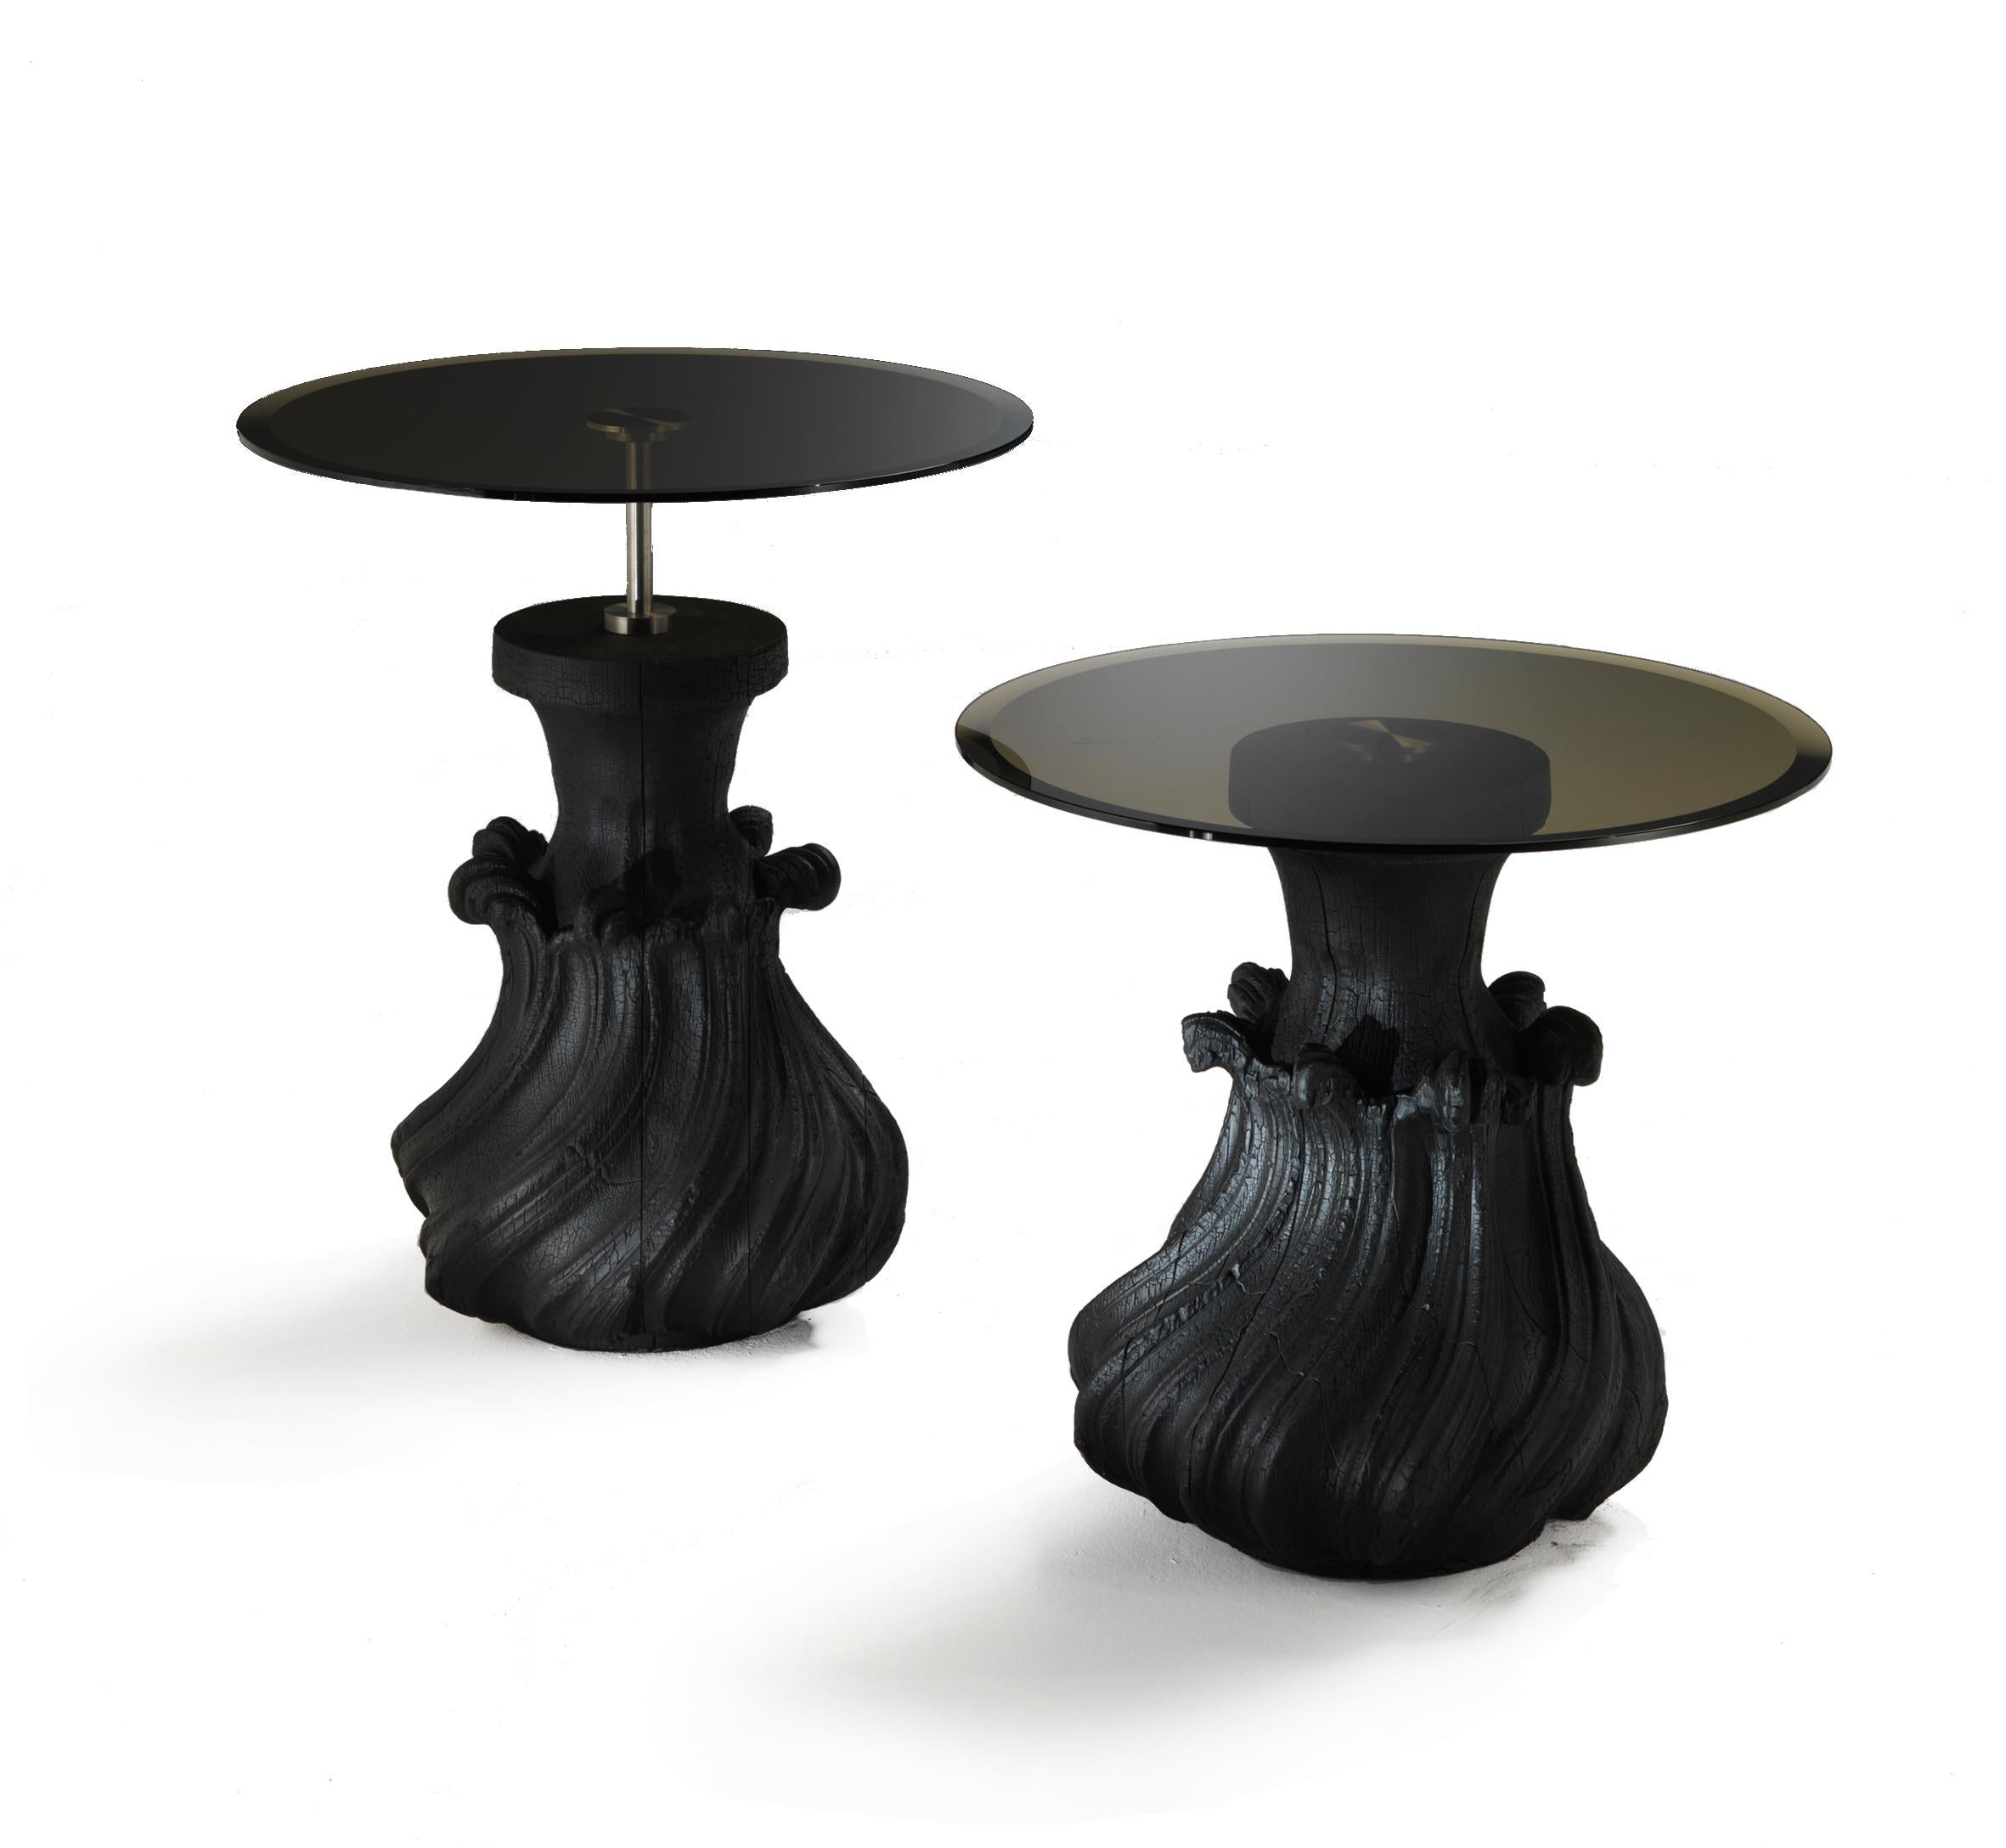 
Introducing the Scoubidou cocktail table, a creation designed by the visionary Nigel Coates that transcends the ordinary. This table is not just a piece of furniture; it's a work of art that seamlessly marries craftsmanship and contemporary